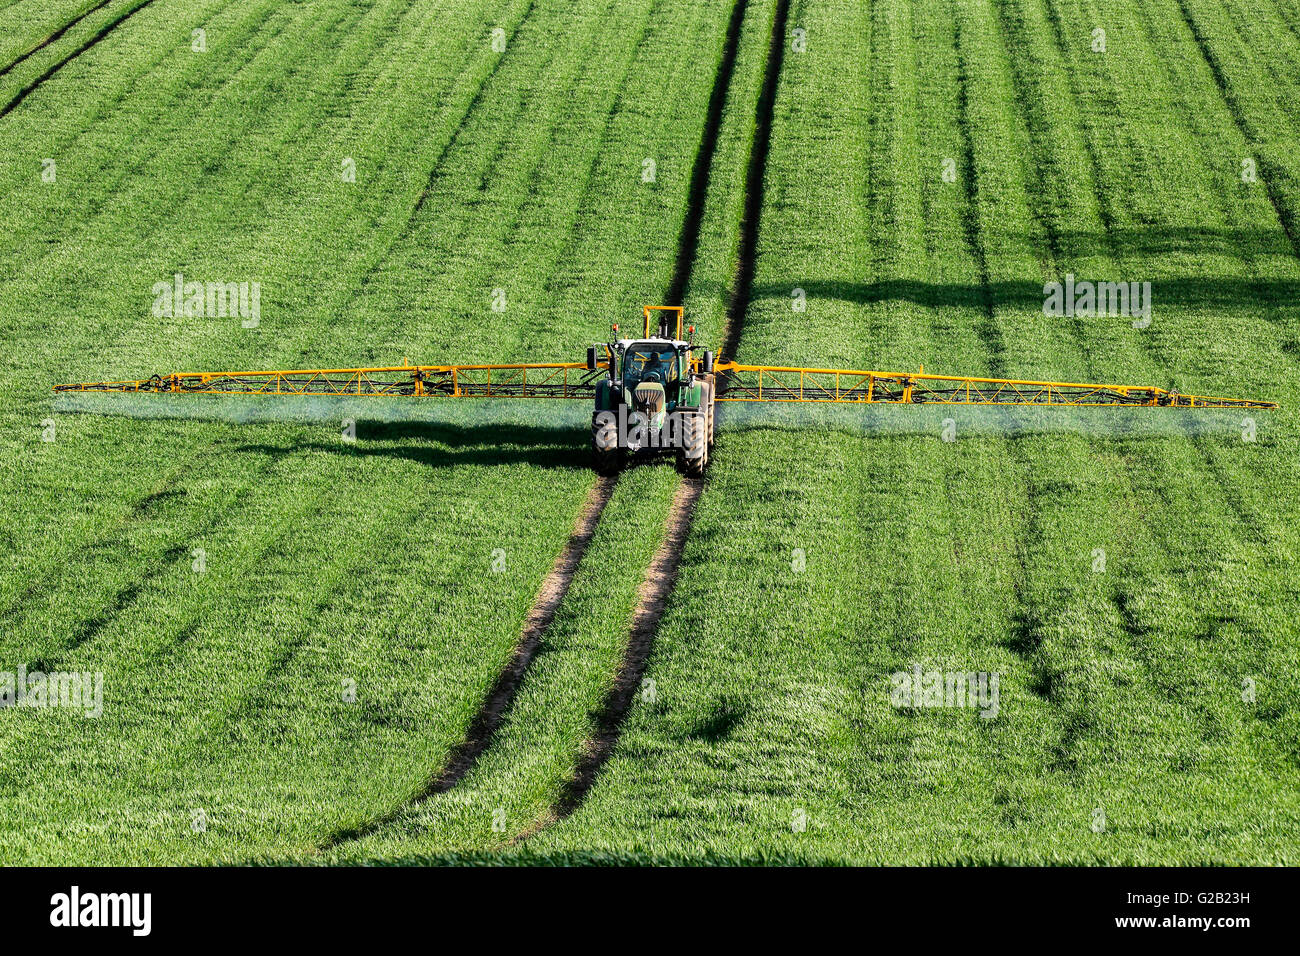 Agriculture - Spraying fertilizer on wheat crop - North Yorkshire - England. Stock Photo